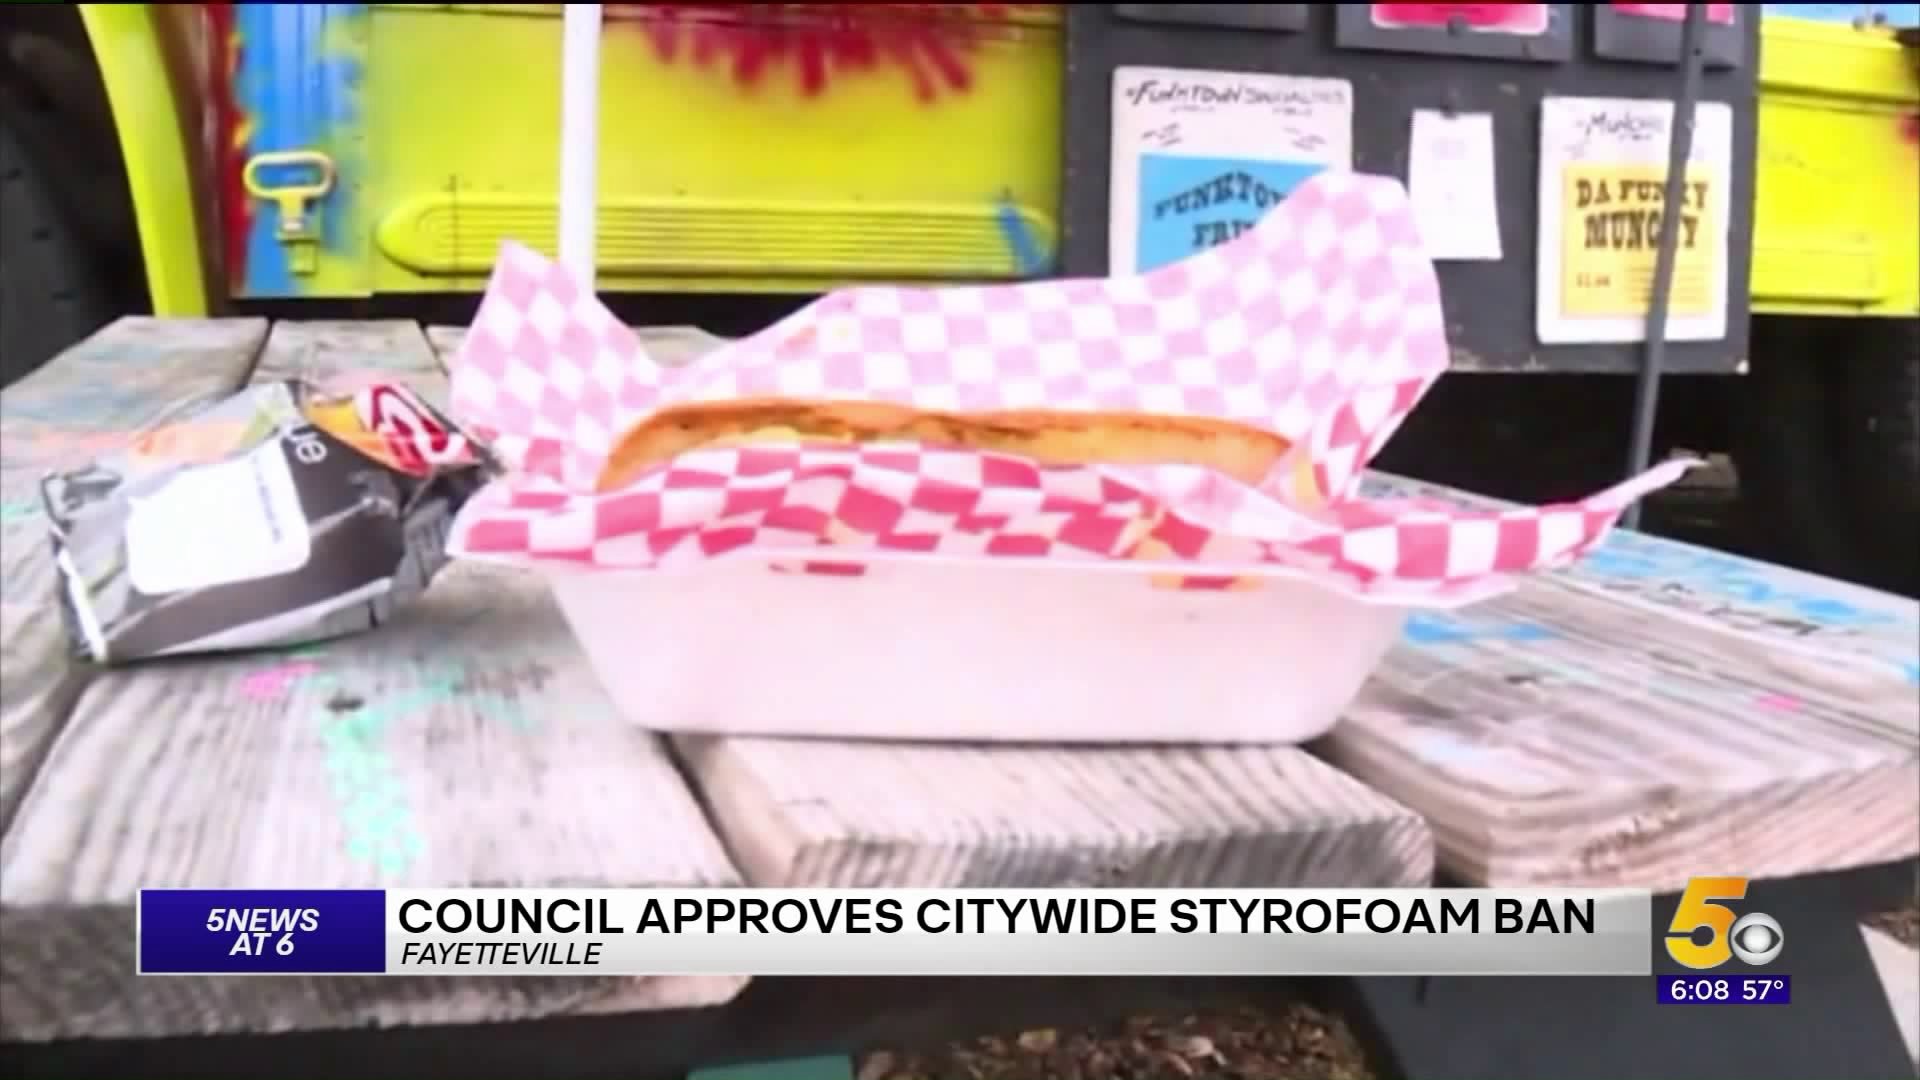 Council Approves Citywide Styrofoam Ban